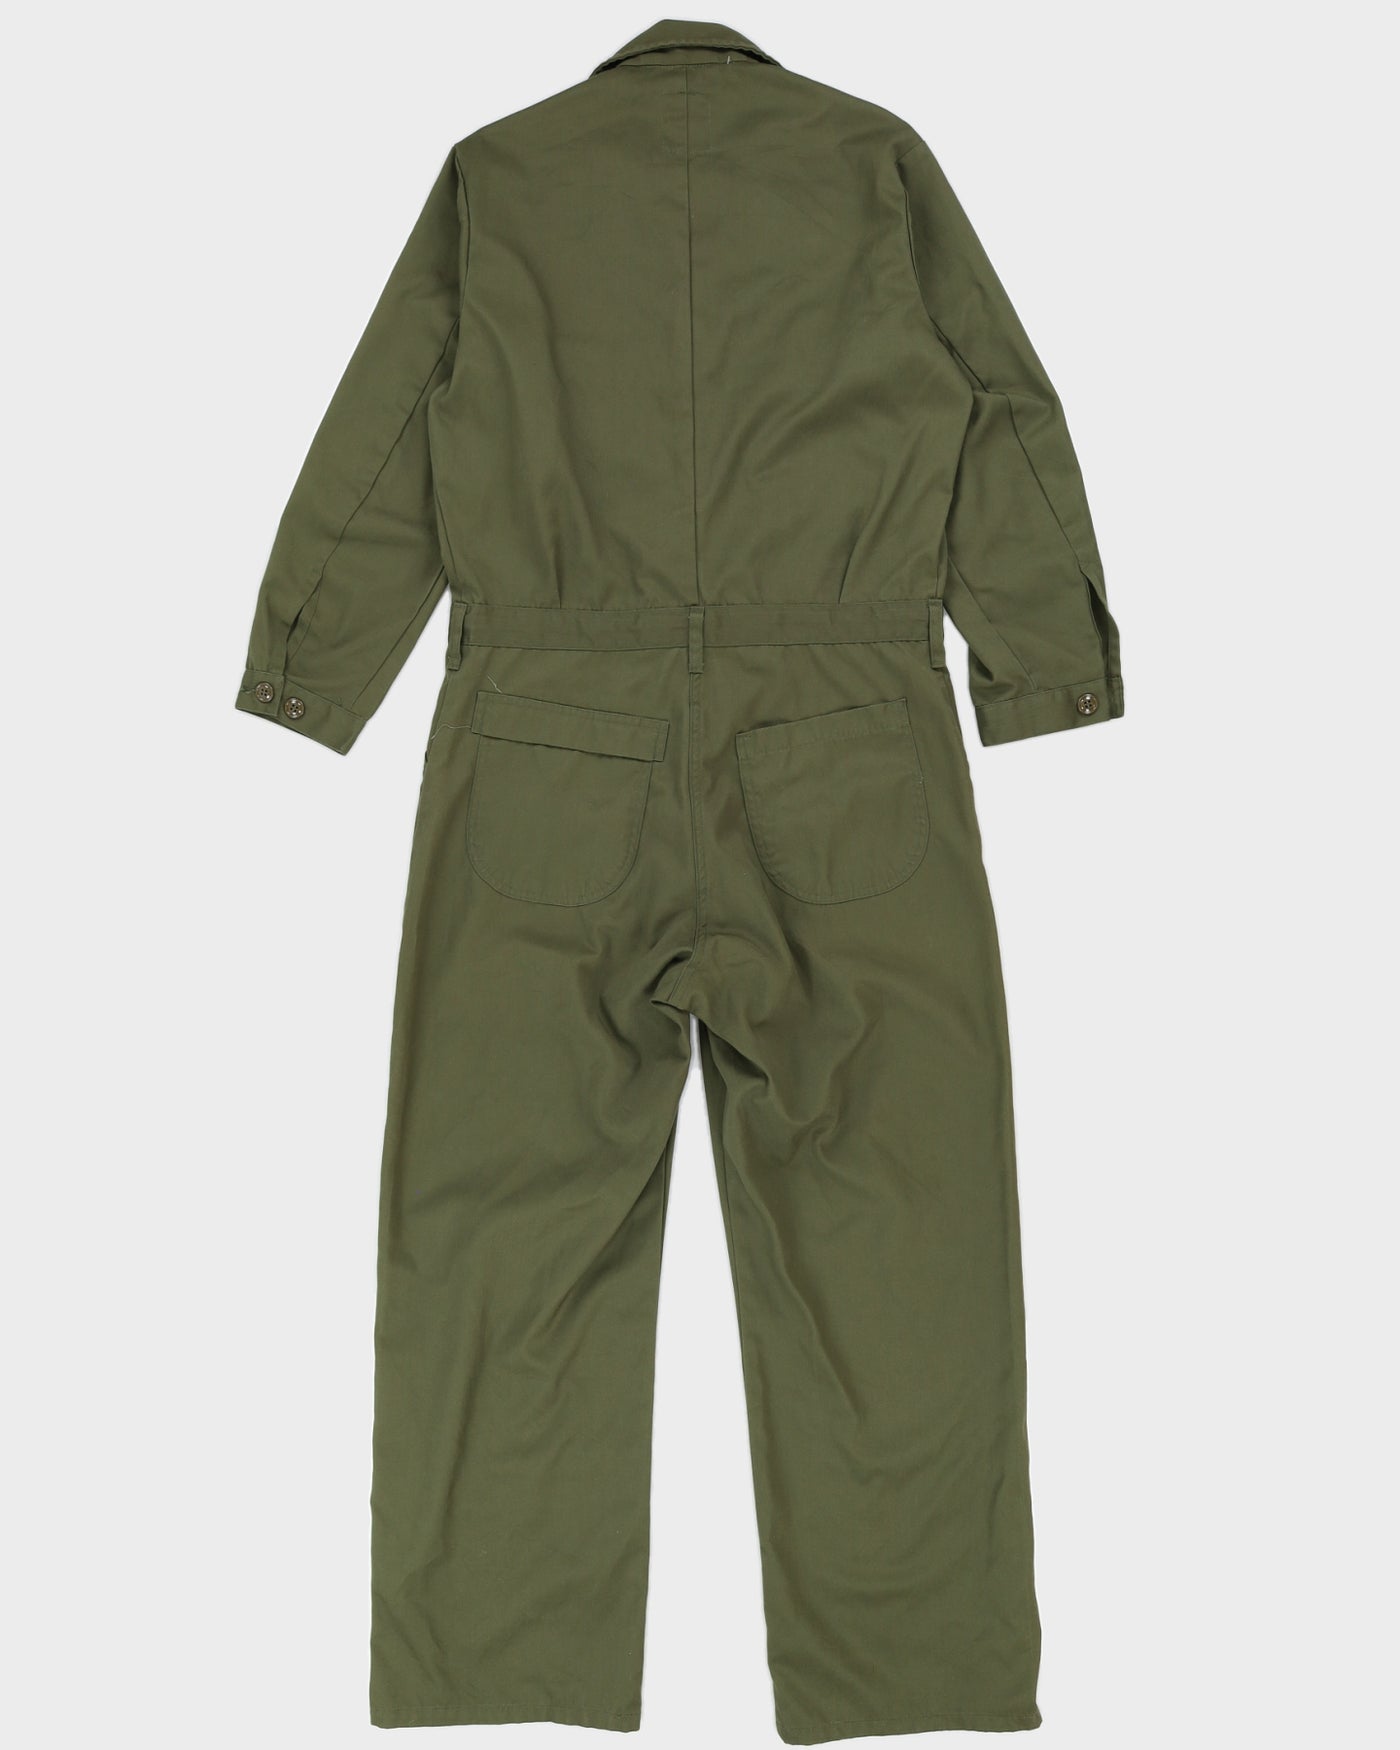 90s US Army Utility Coveralls - M